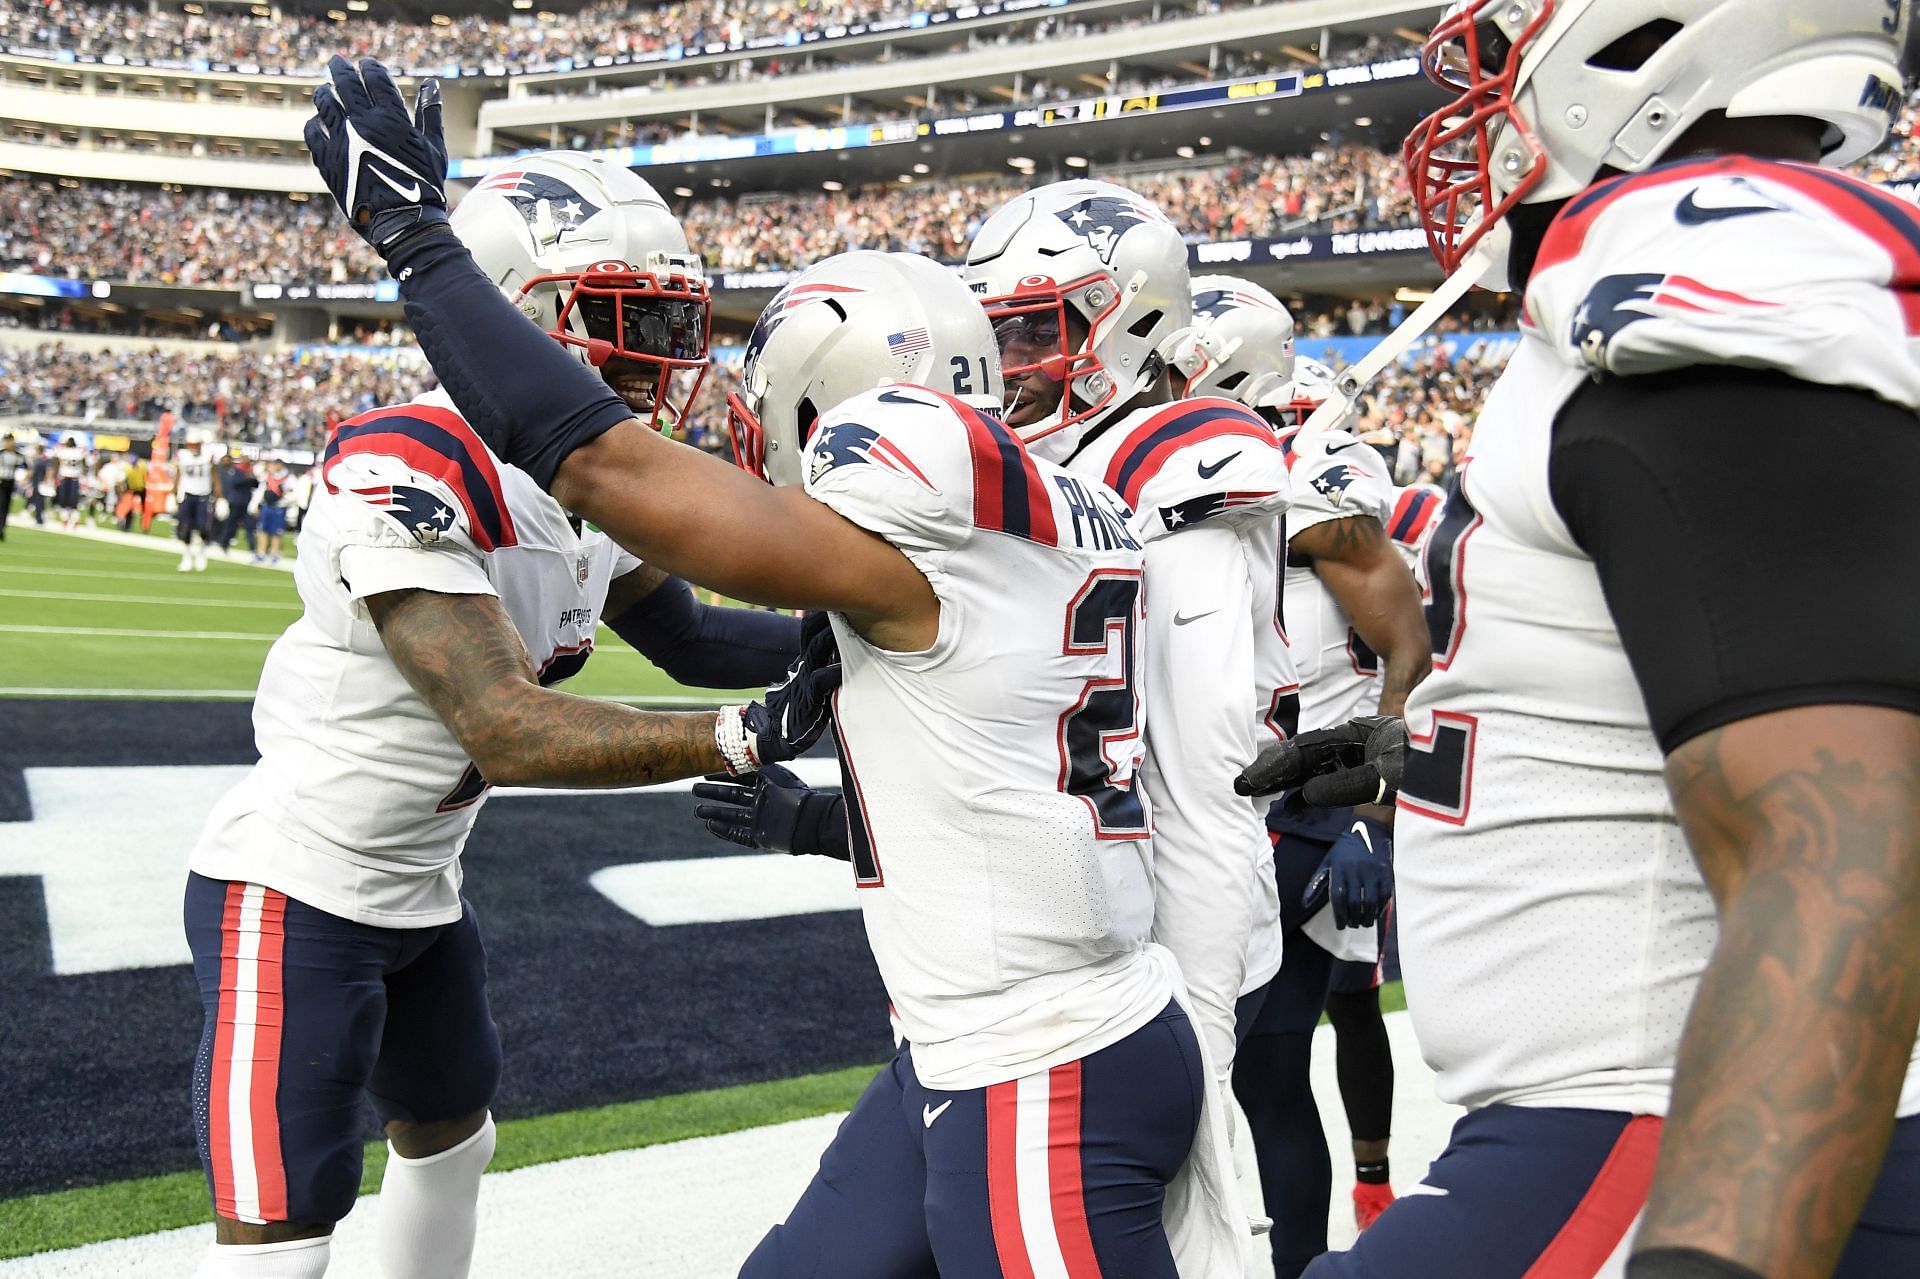 The New England Patriots celebrate after scoring against the Los Angeles Chargers last weekend